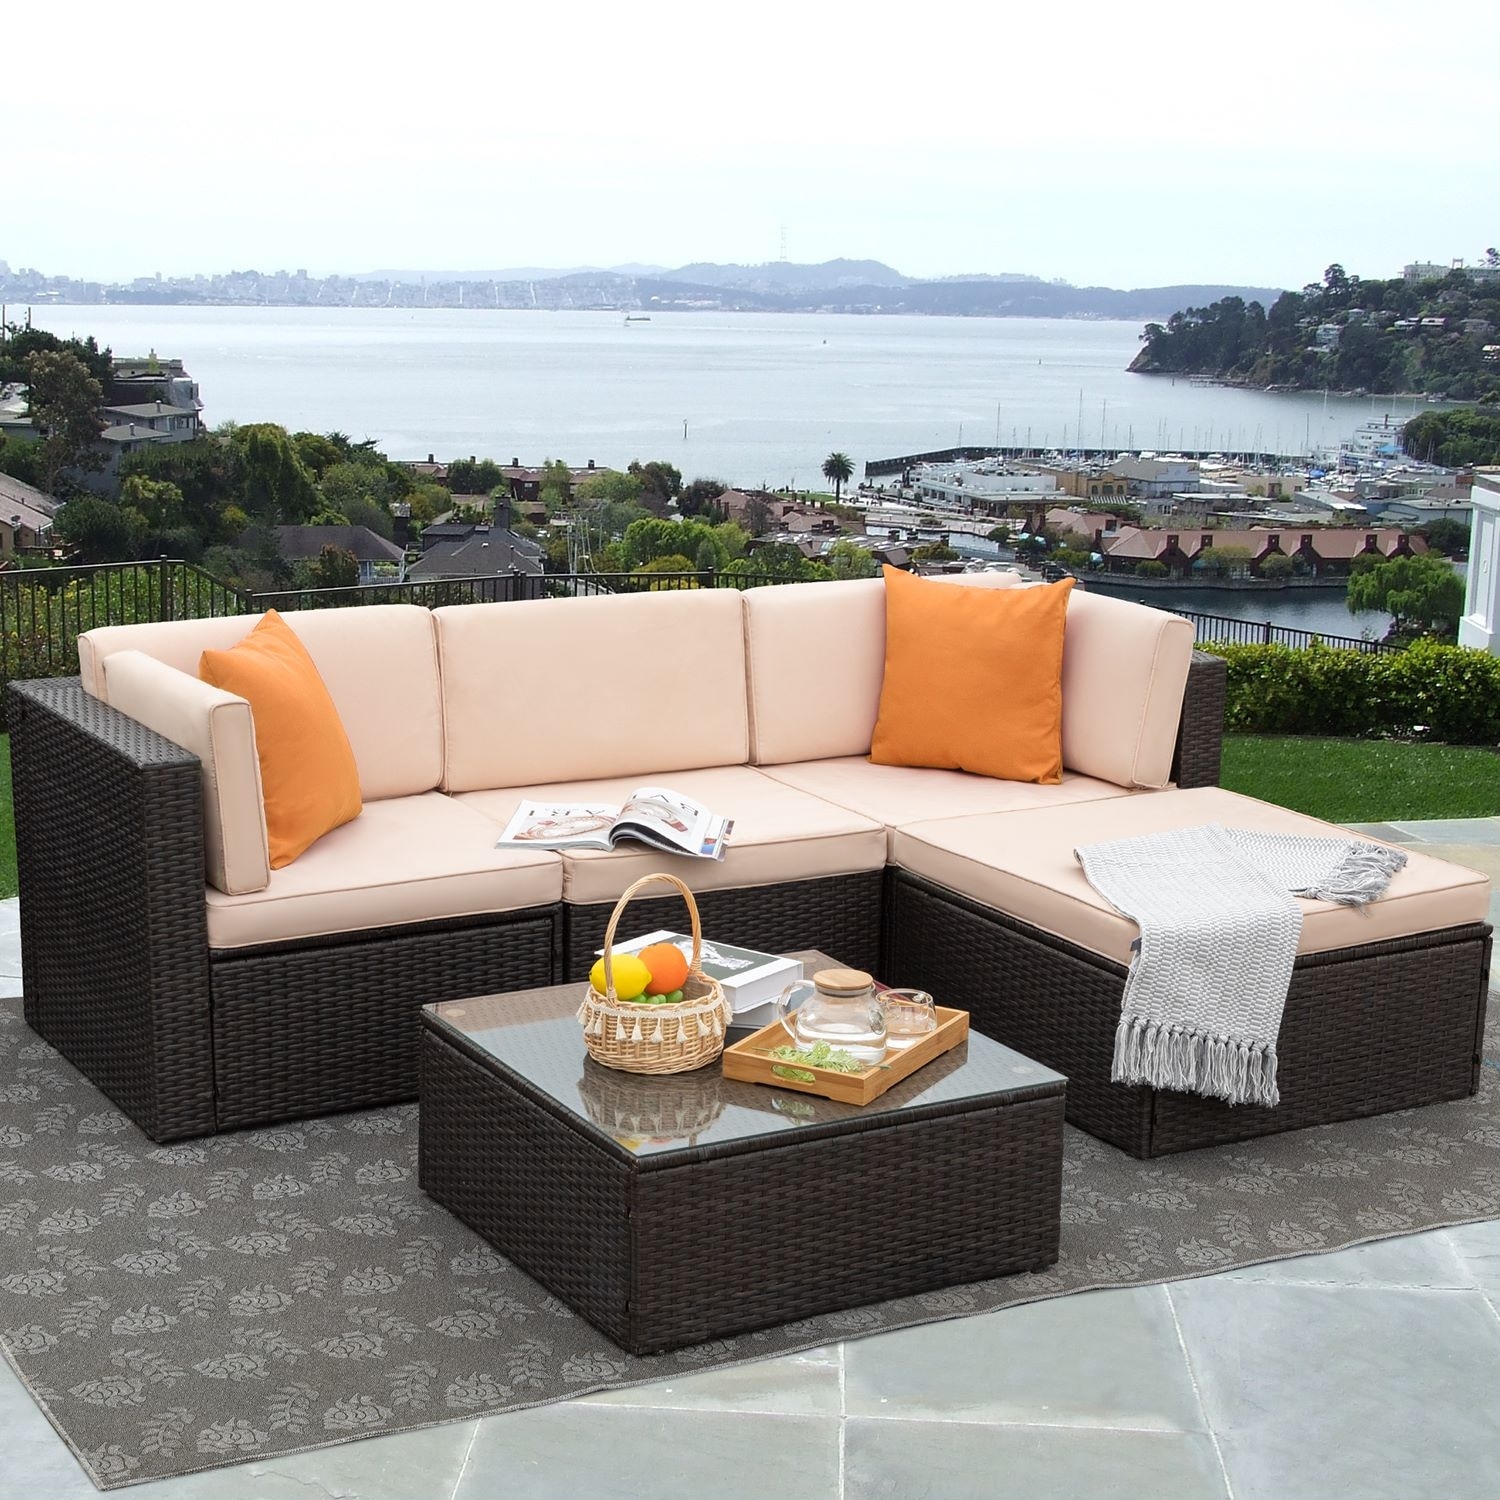 Patio PE Wicker Furniture Set 4 Pieces Outdoor Brown Rattan Sectional  Conversation Sofa Chair with Storage Box Table and Khaki Cushions